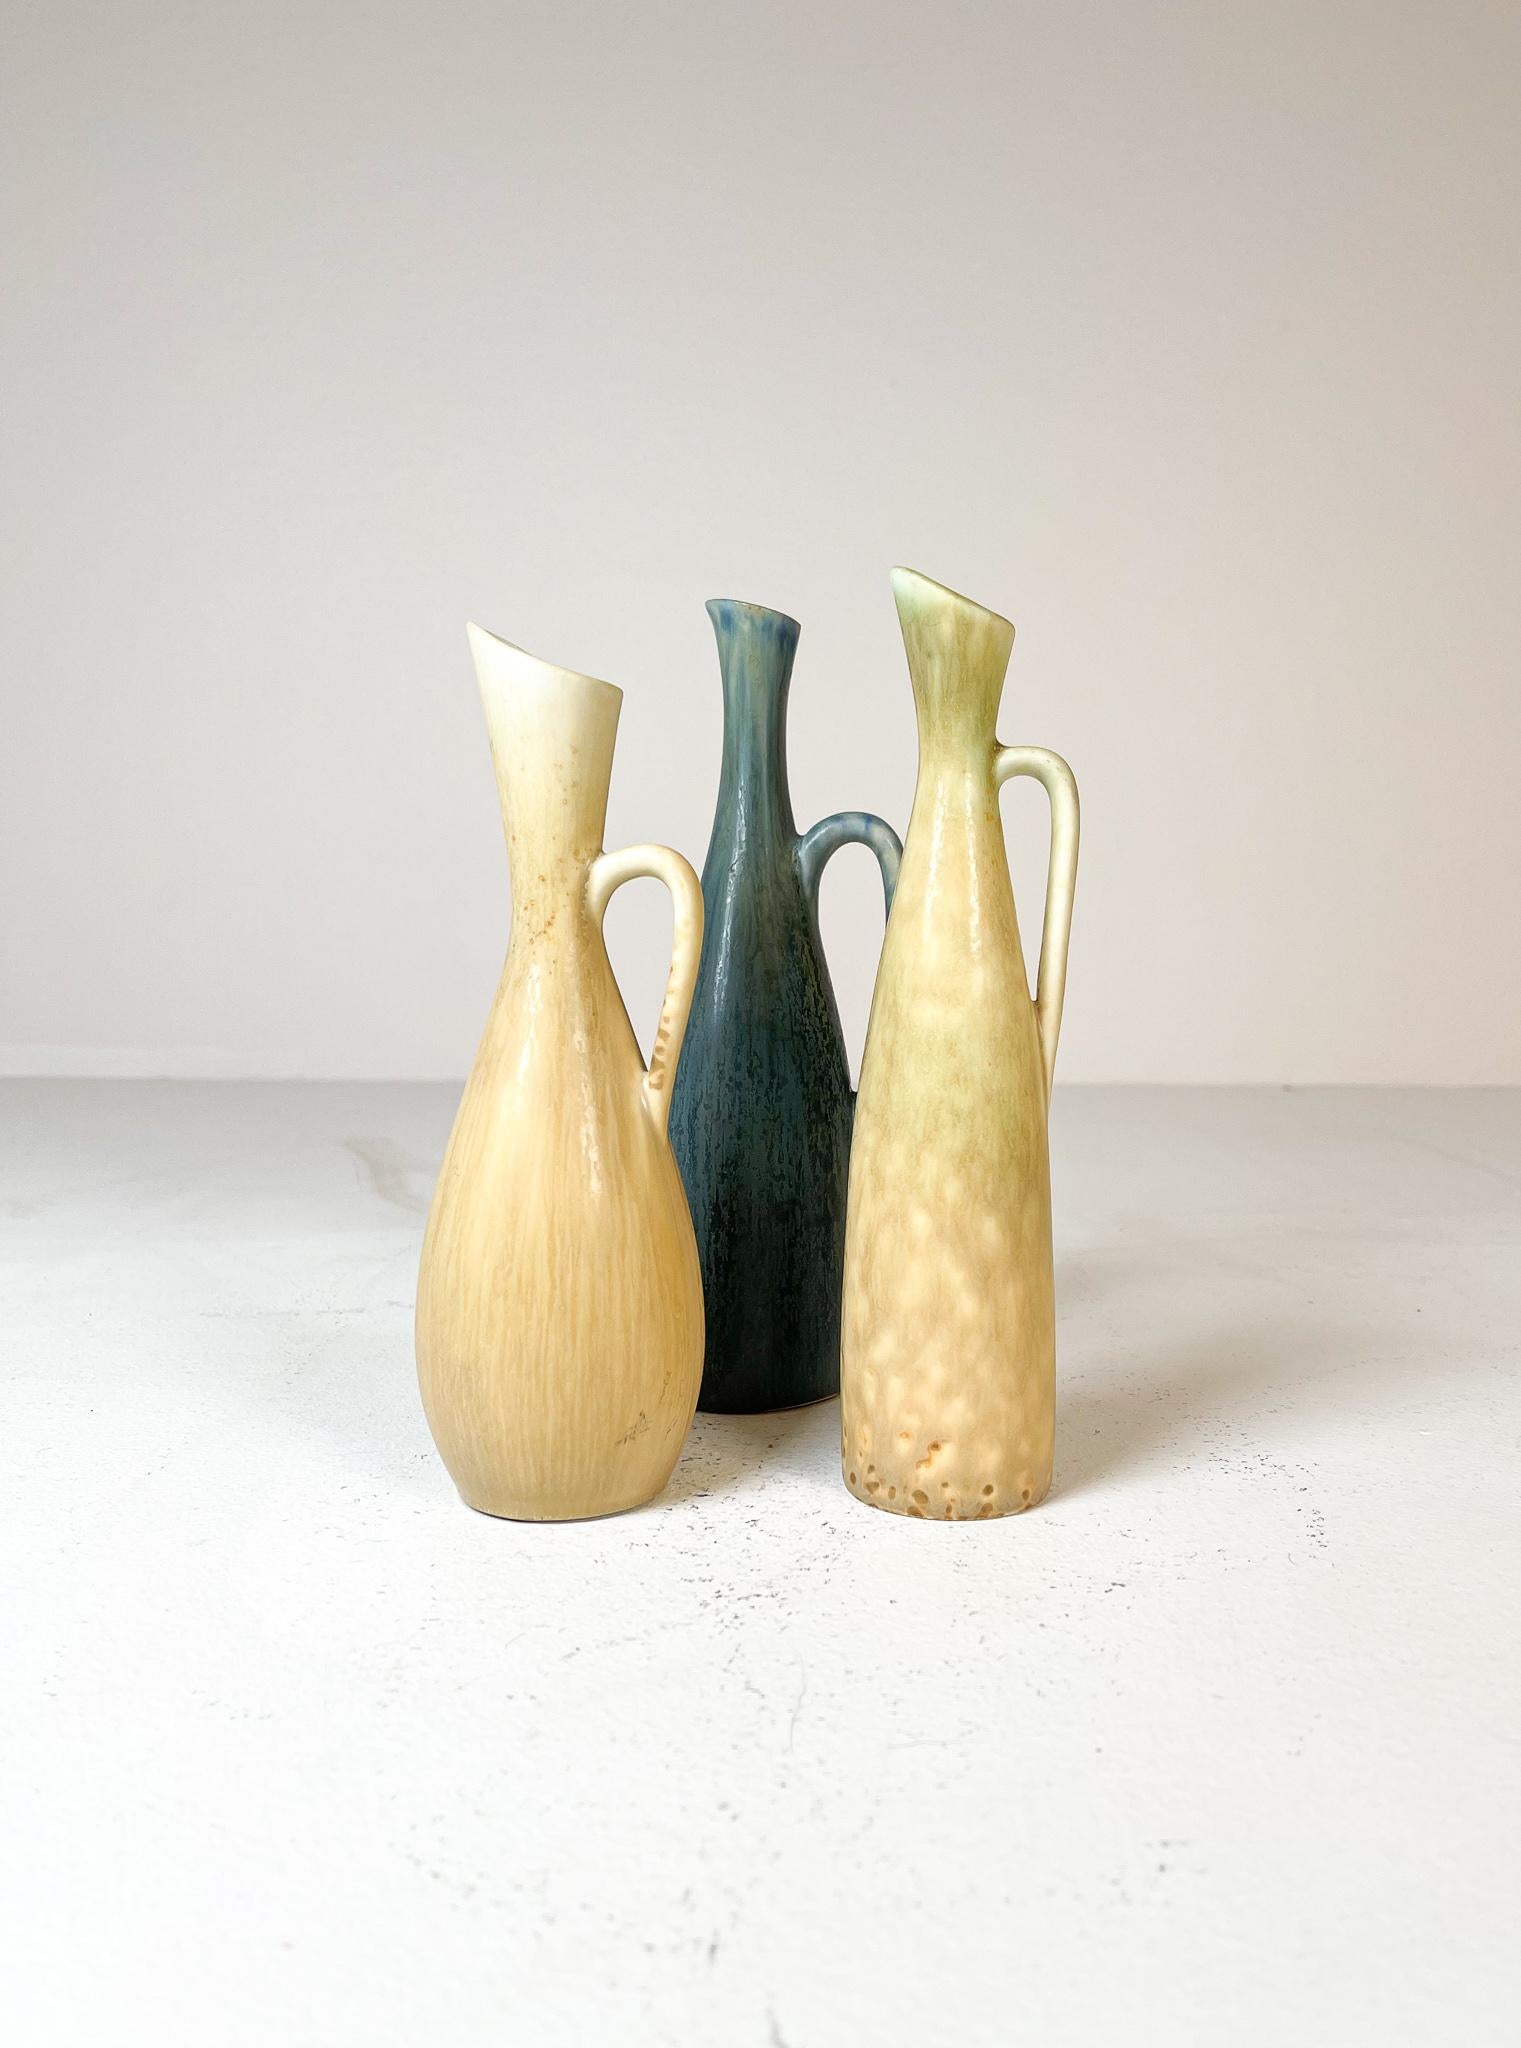 Collection of 3 mid-century vases manufactured at Rörstrand and maker/designer Carl Harry Stålhane. Made in Sweden in the 1950s. Beautiful glazed vases with nice lines. That typical hares fur glaze made at Rörstrand and the designer C-H Stålhane